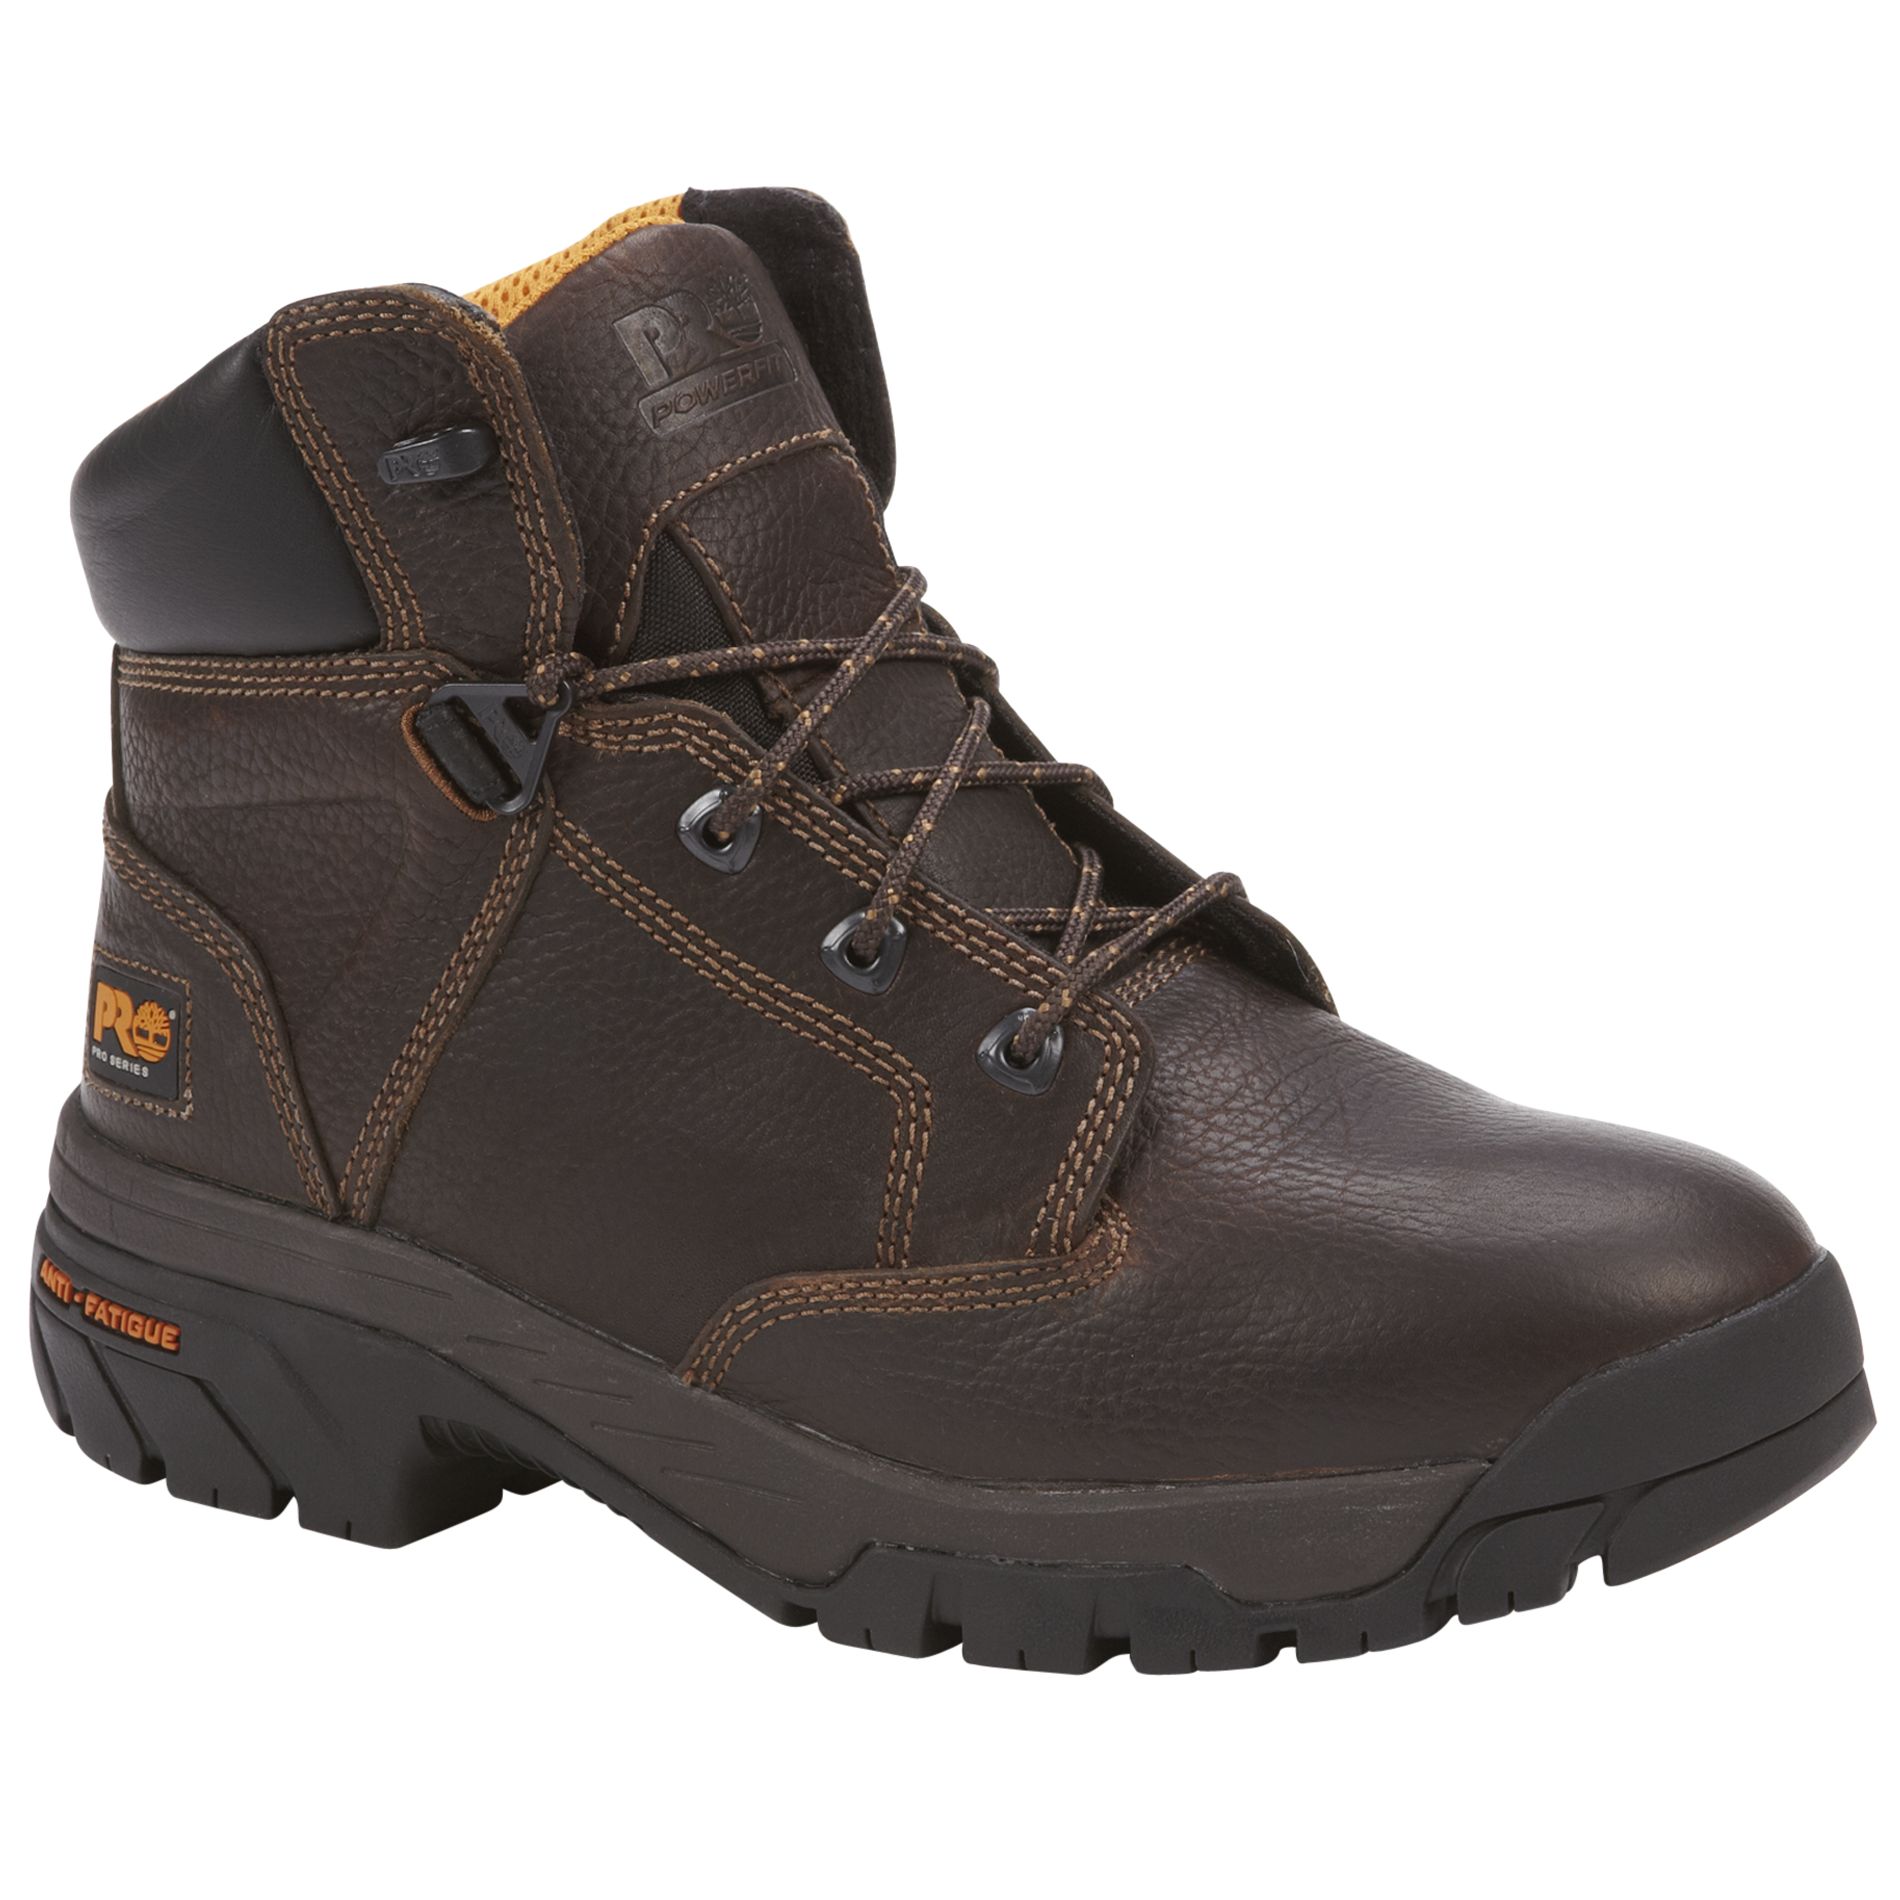 Timberland PRO Men's Work Boot 6" Helix Waterproof Soft Toe with Anti-Fatigue Technology  - Brown